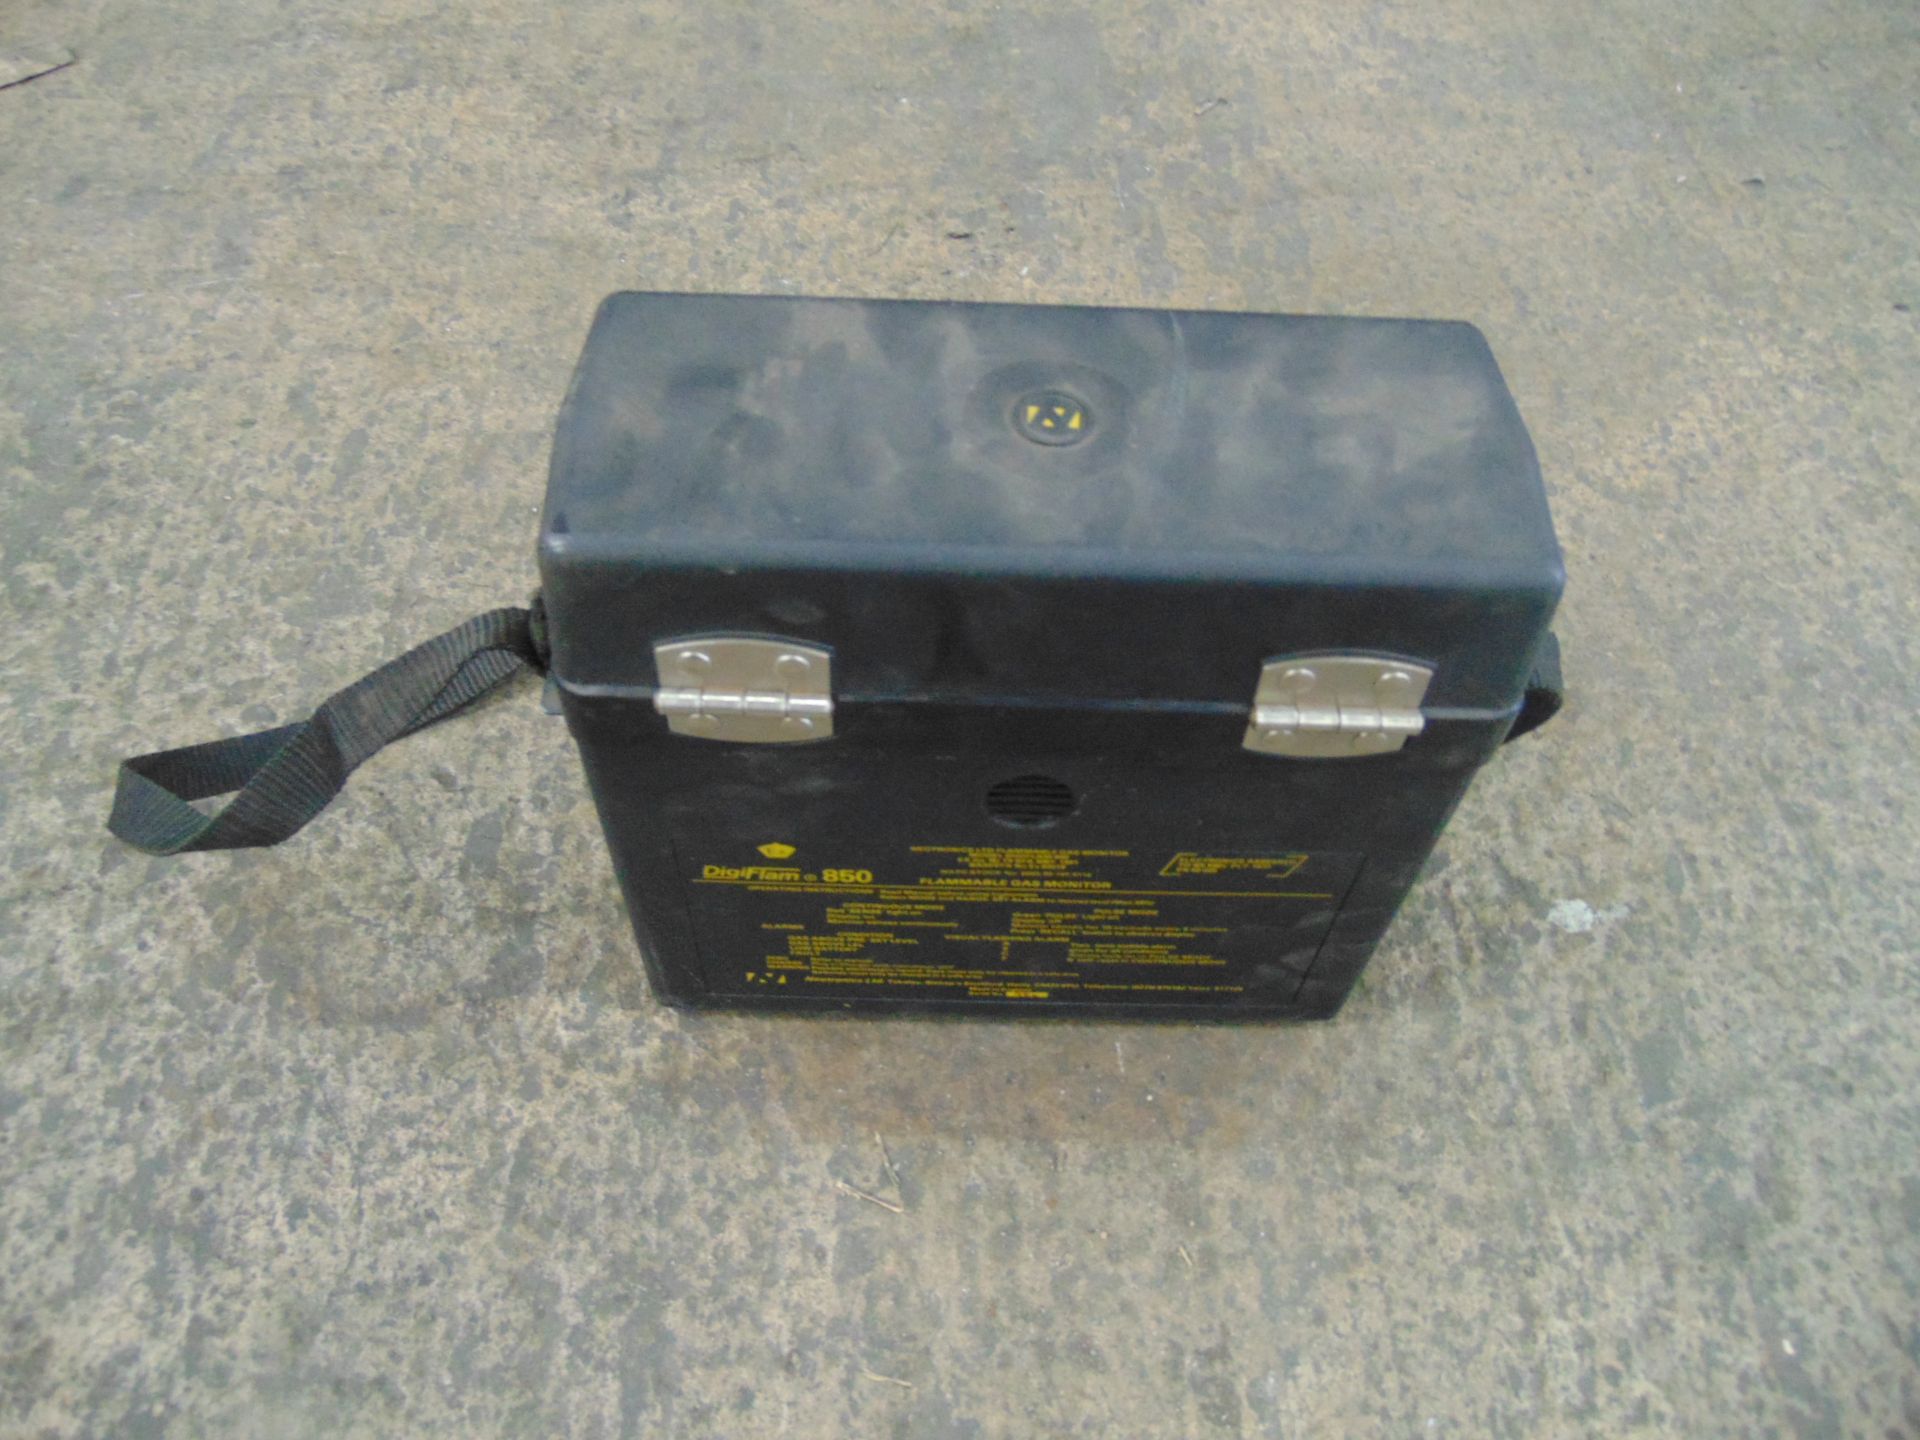 Digiflam Flammable Gas Monitor - Image 5 of 5